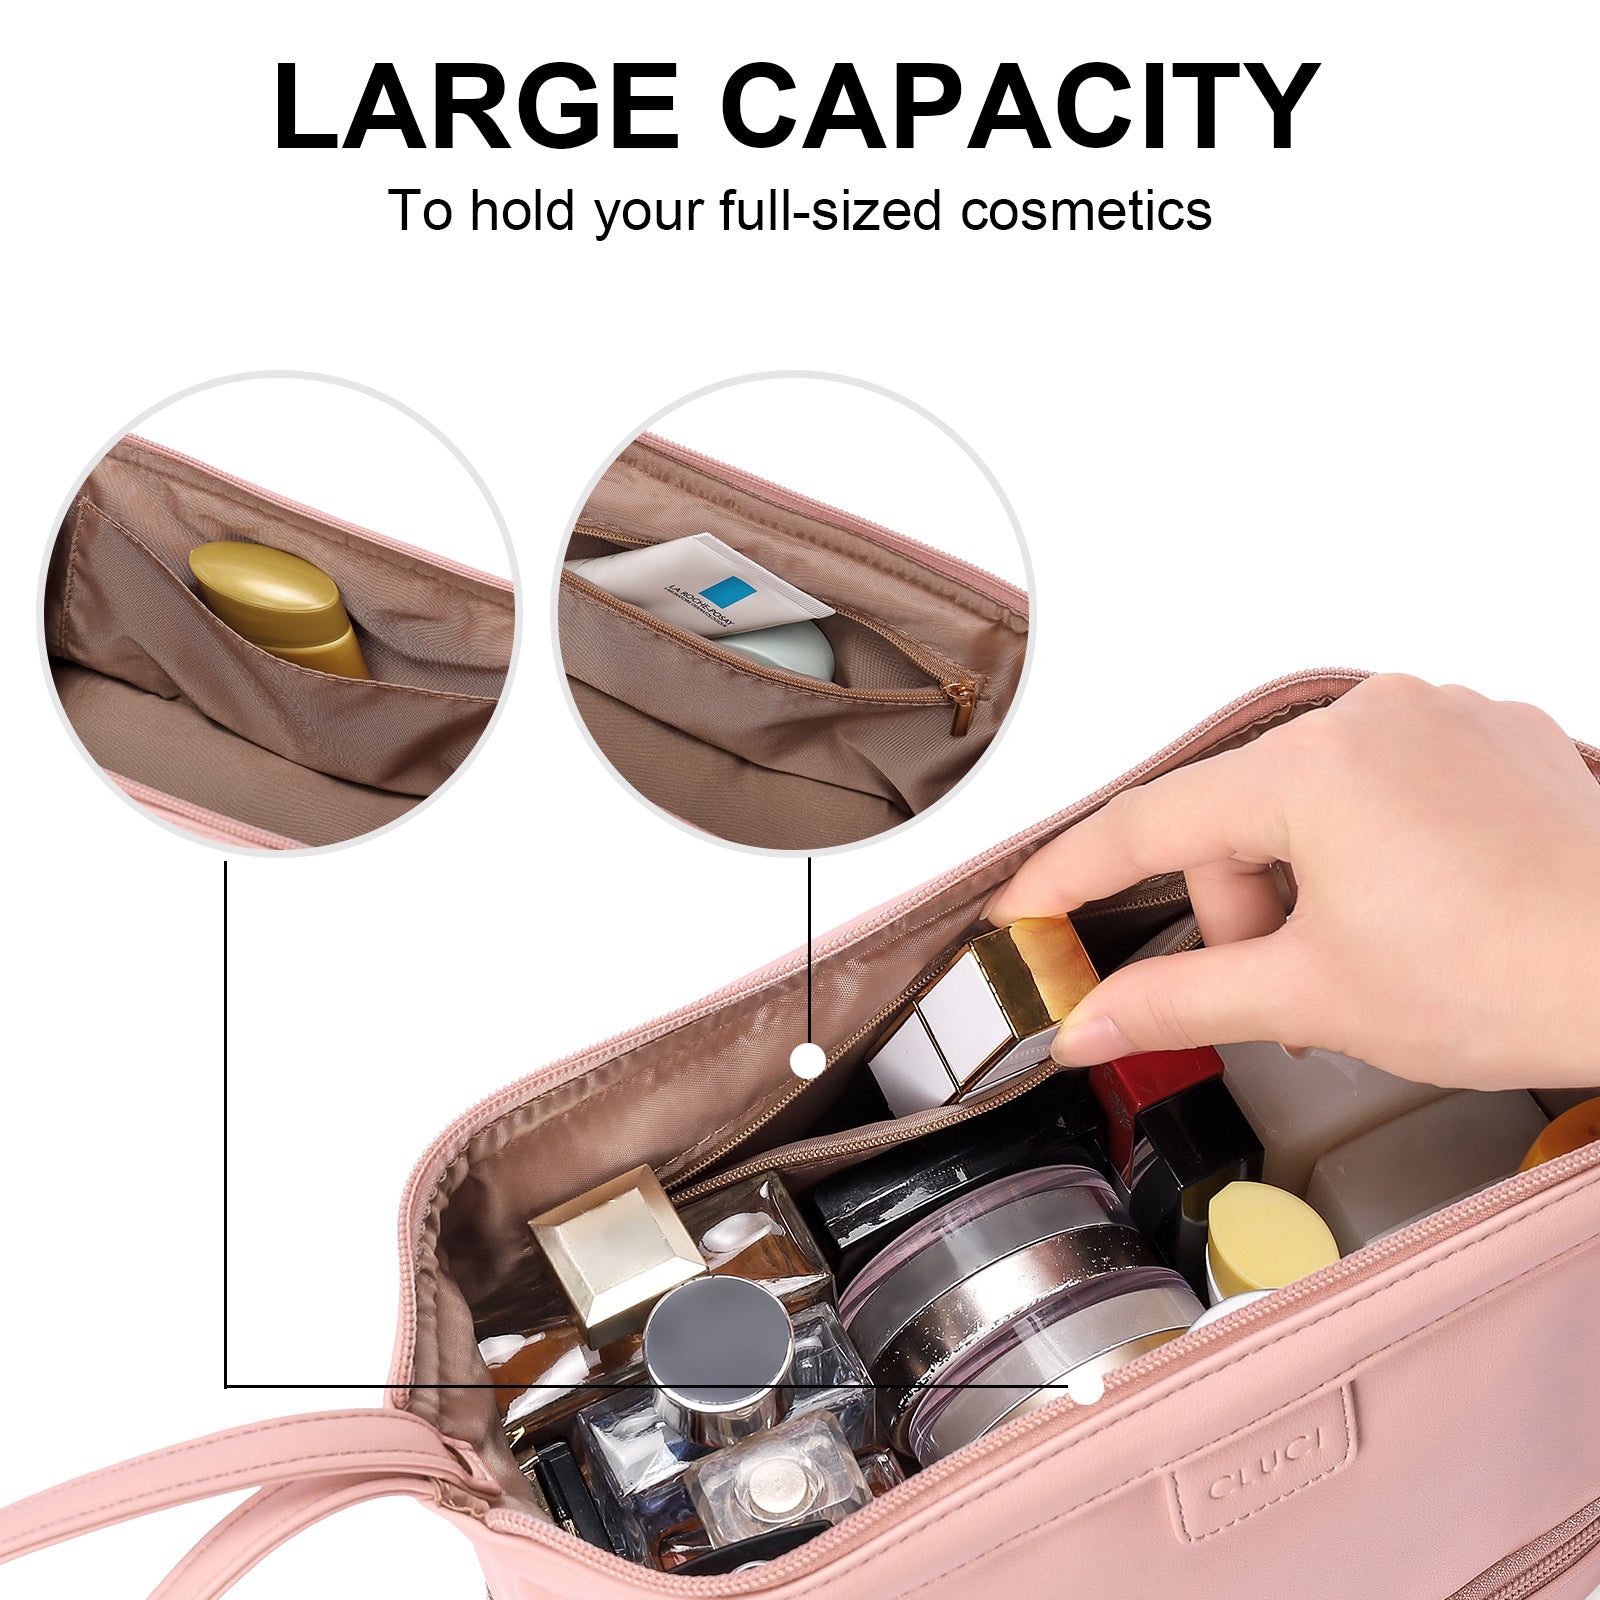 CLUCI Travel Makeup Bag Cosmetic Bag Large Capacity Makeup Bag Organizer PU Leather Water-resistant Women Double Layer Portable Cosmetic Travel Bags Traveling Toiletry Bag